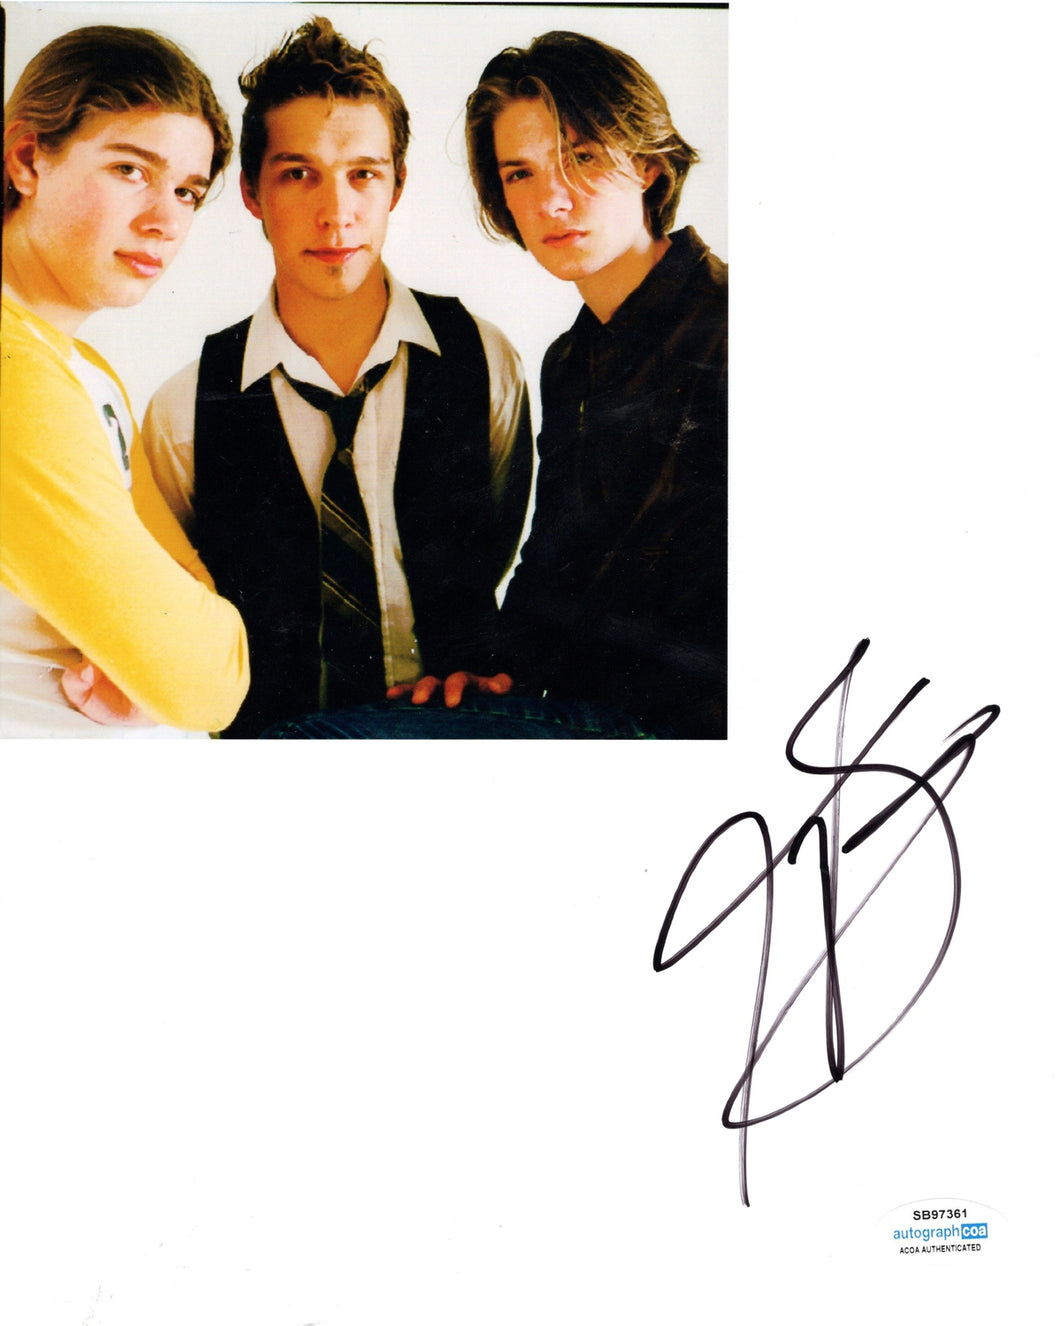 Taylor Hanson Autographed Signed 8x10 Young Hanson Band Photo